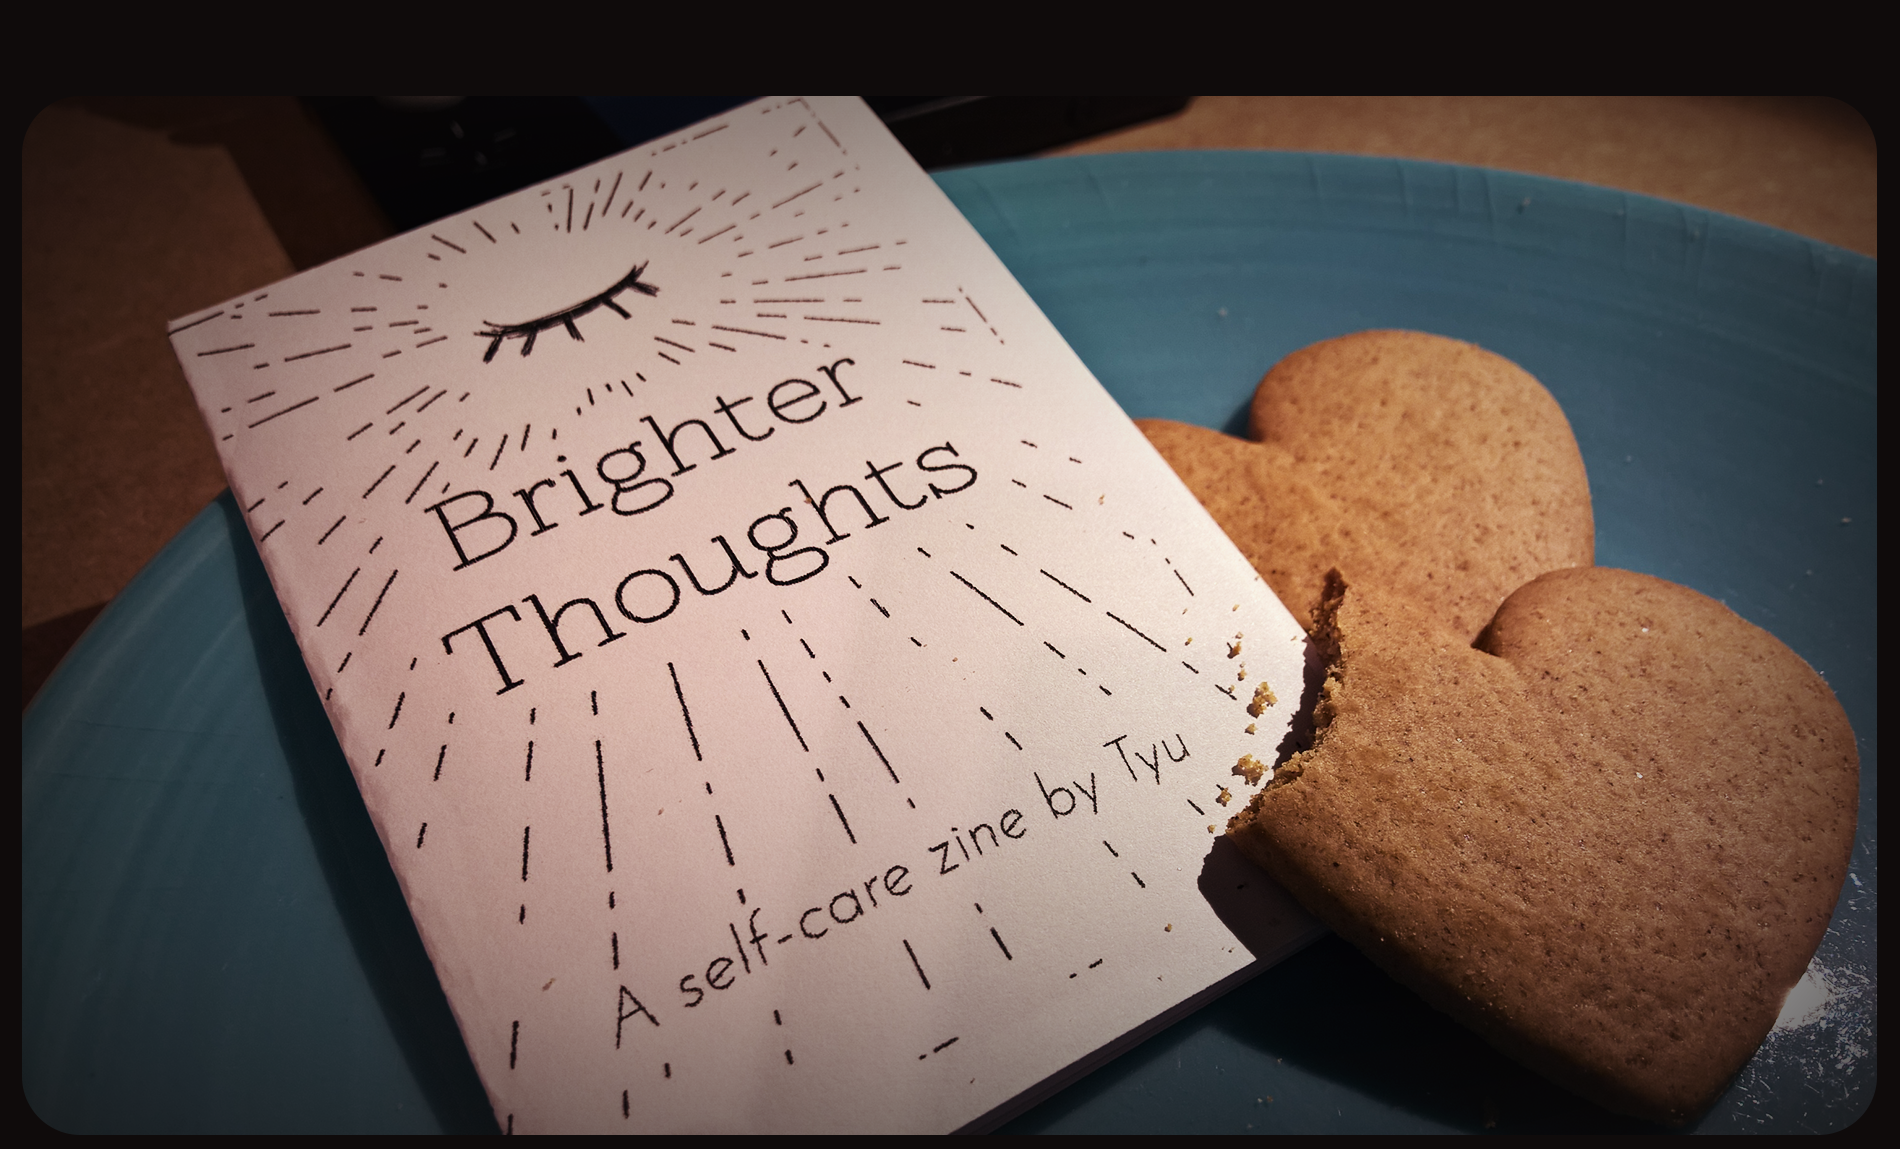 Brighter Thoughts